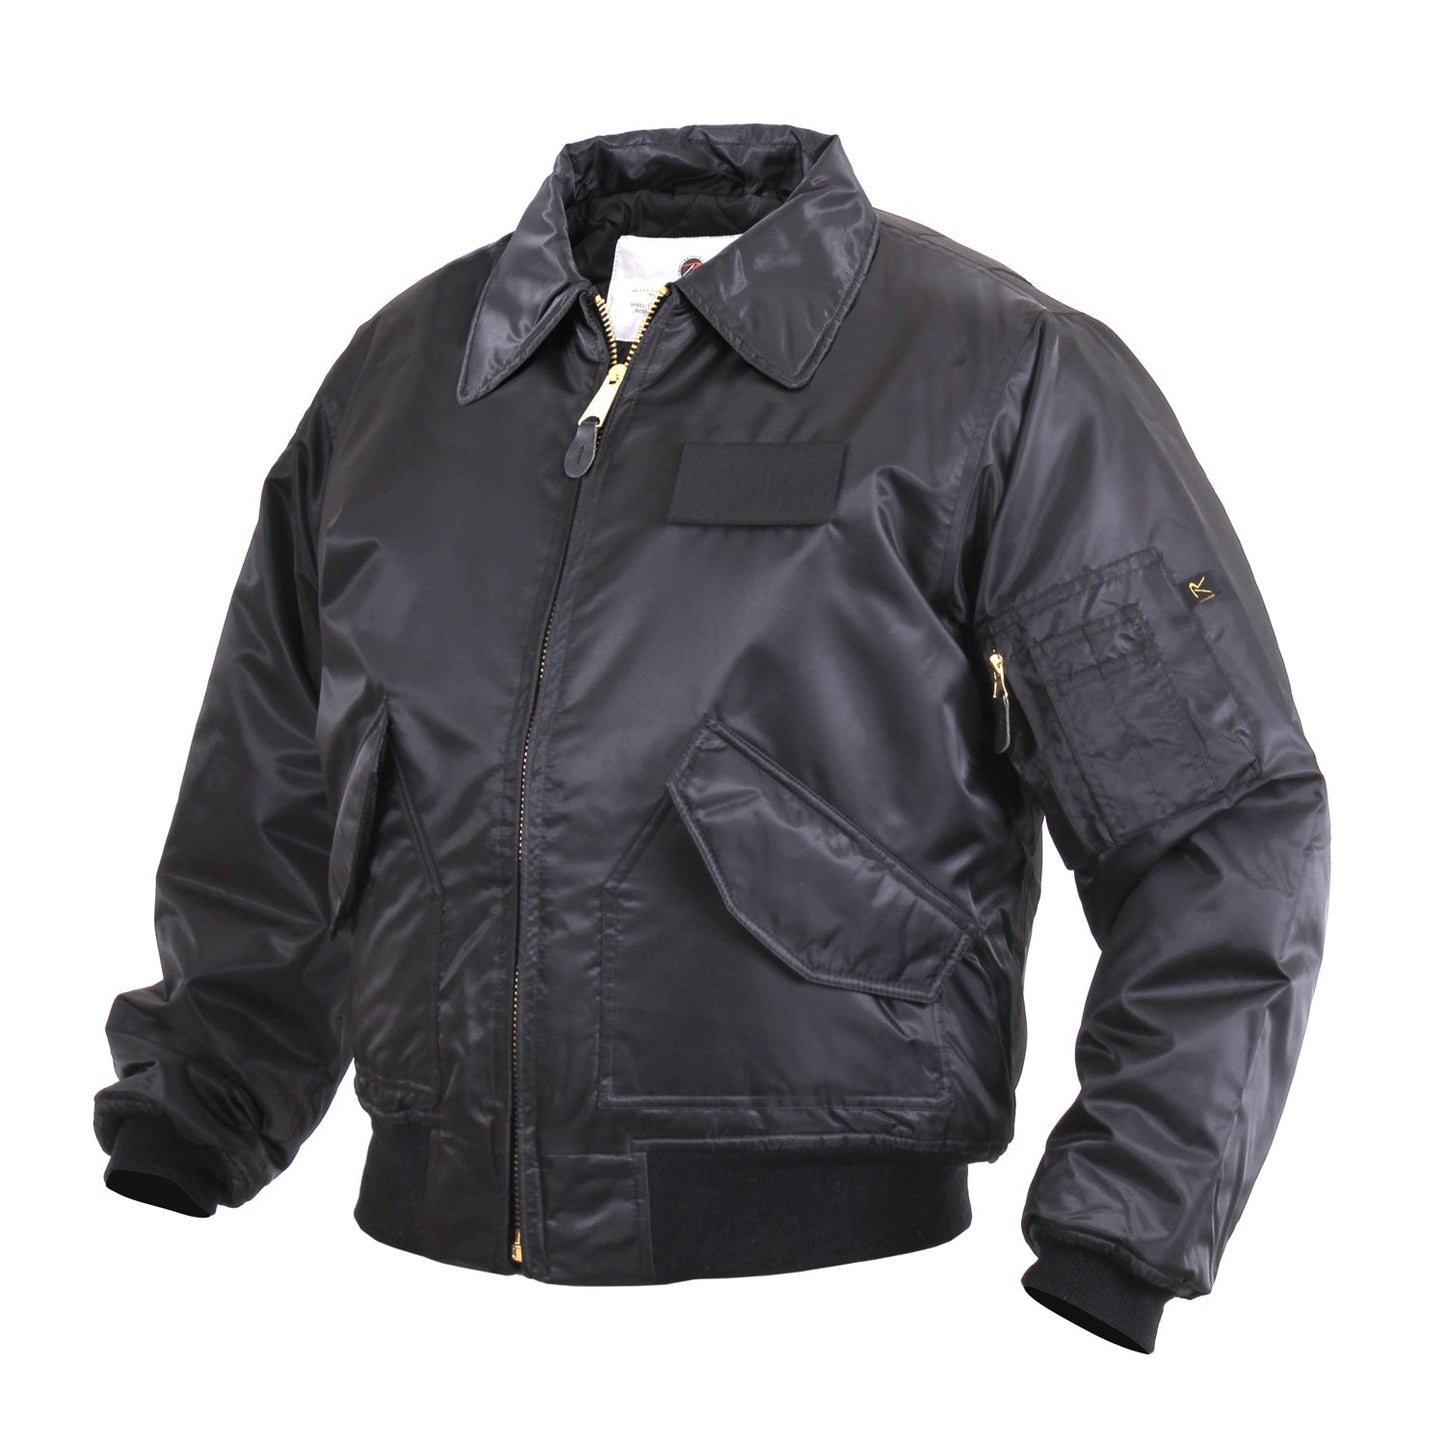 Rothco's CWU-45P (Cold Weather Uniform) Flight Jacket is designed with a water repelling nylon outer shell and a matching quilted polyester liner for optimal warmth; making this the ideal cold weather jacket you can own.